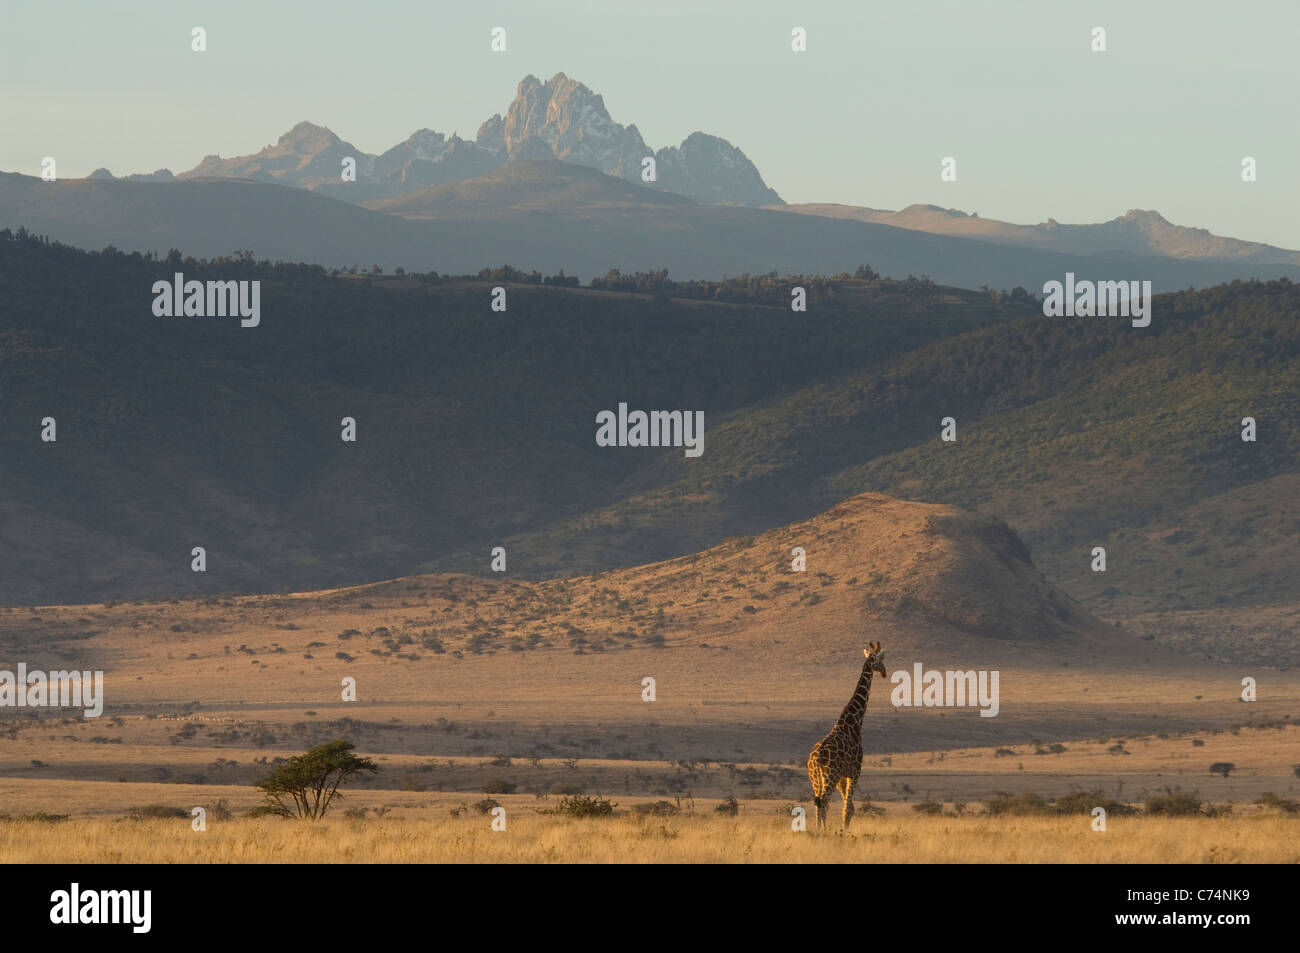 Africa, Kenya, Lewa Downs-Reticulated giraffe in plains early AM with Mt. Kenya in background Stock Photo